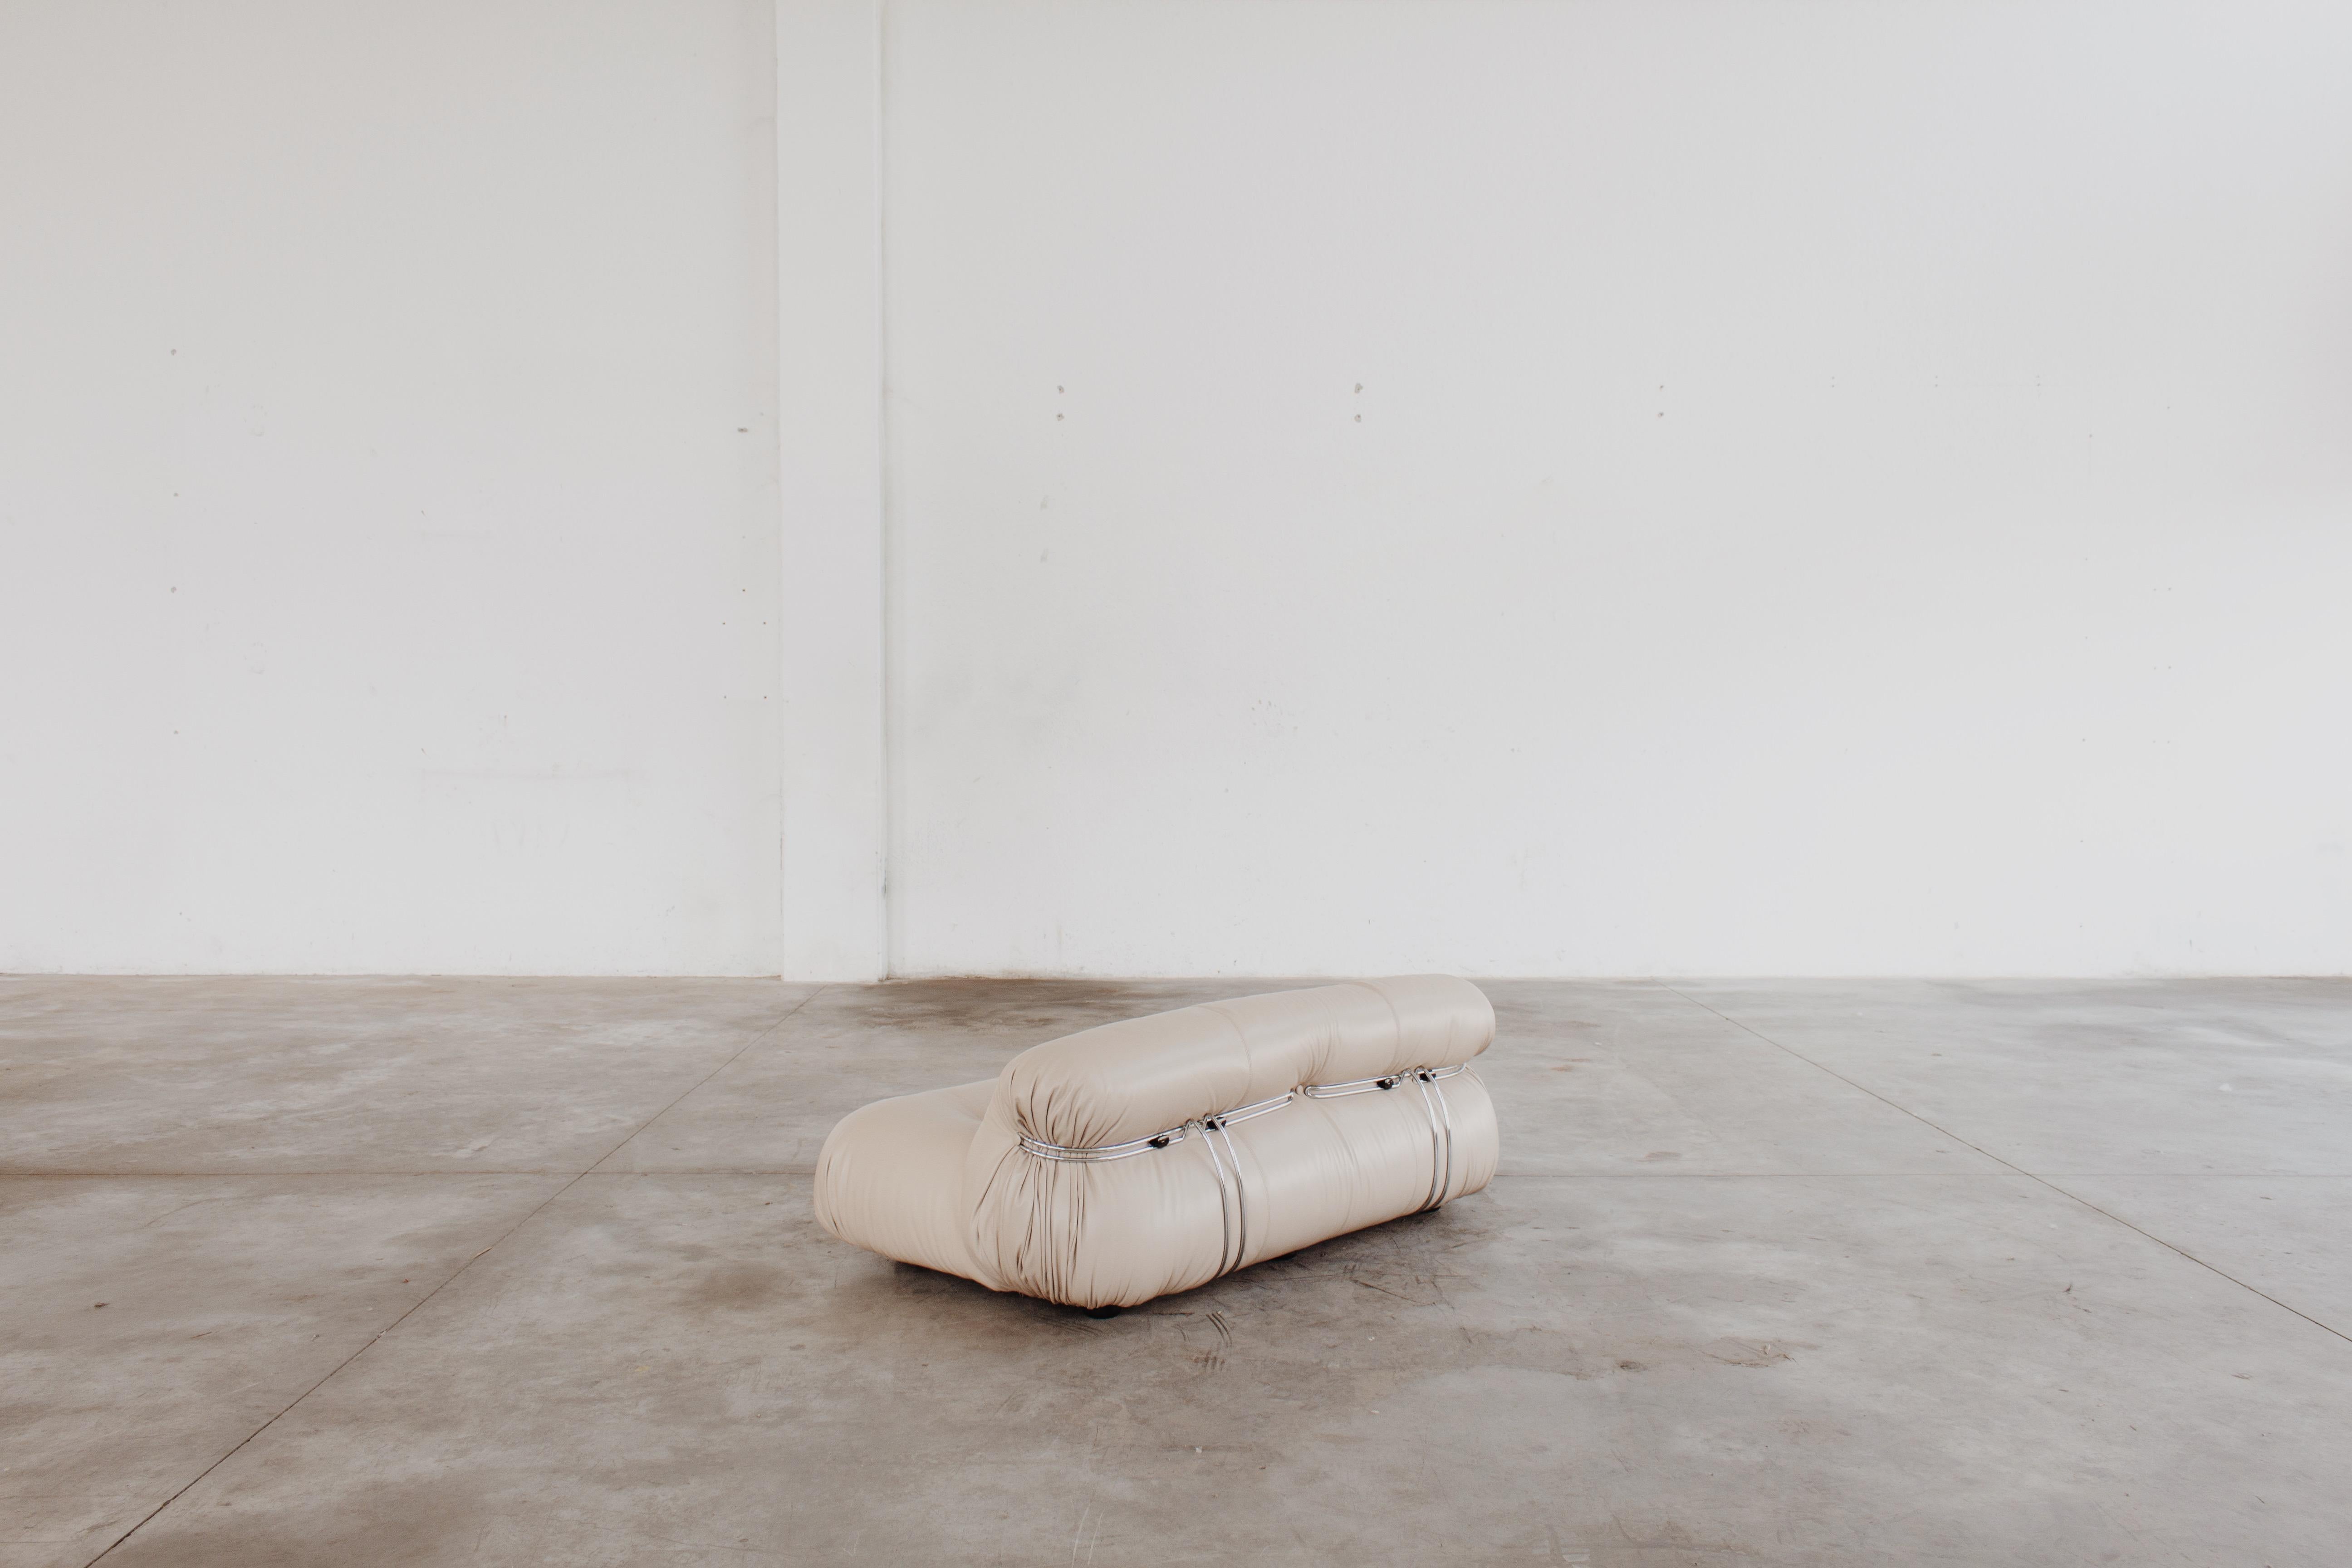 Mid-20th Century Afra & Tobia Scarpa “Soriana” Sofa for Cassina, Champagne Leather, 1969 For Sale